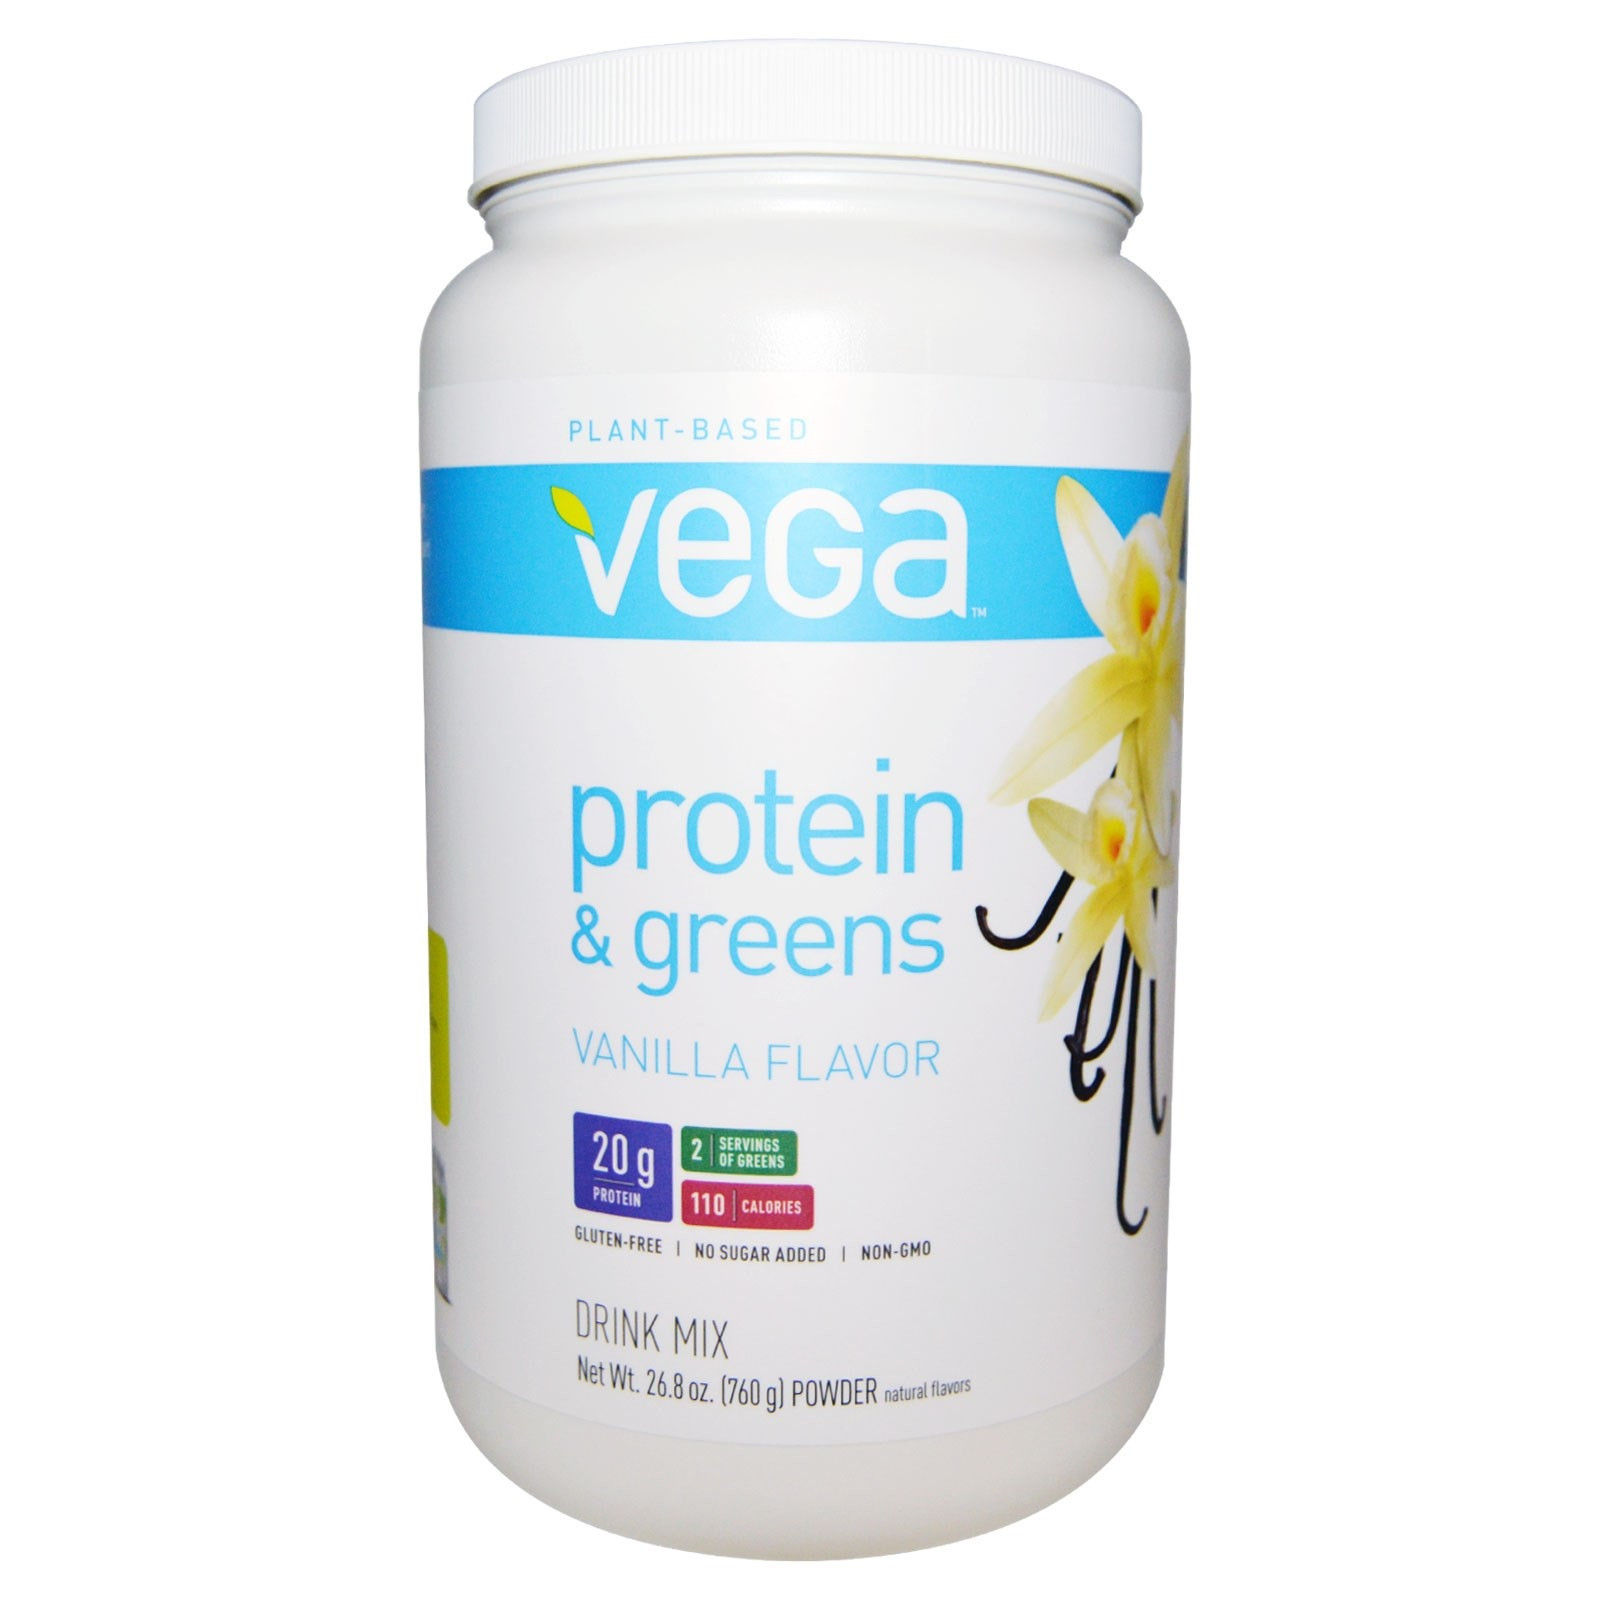 Vega Organic Protein And Greens
 Vega Protein and Greens Review